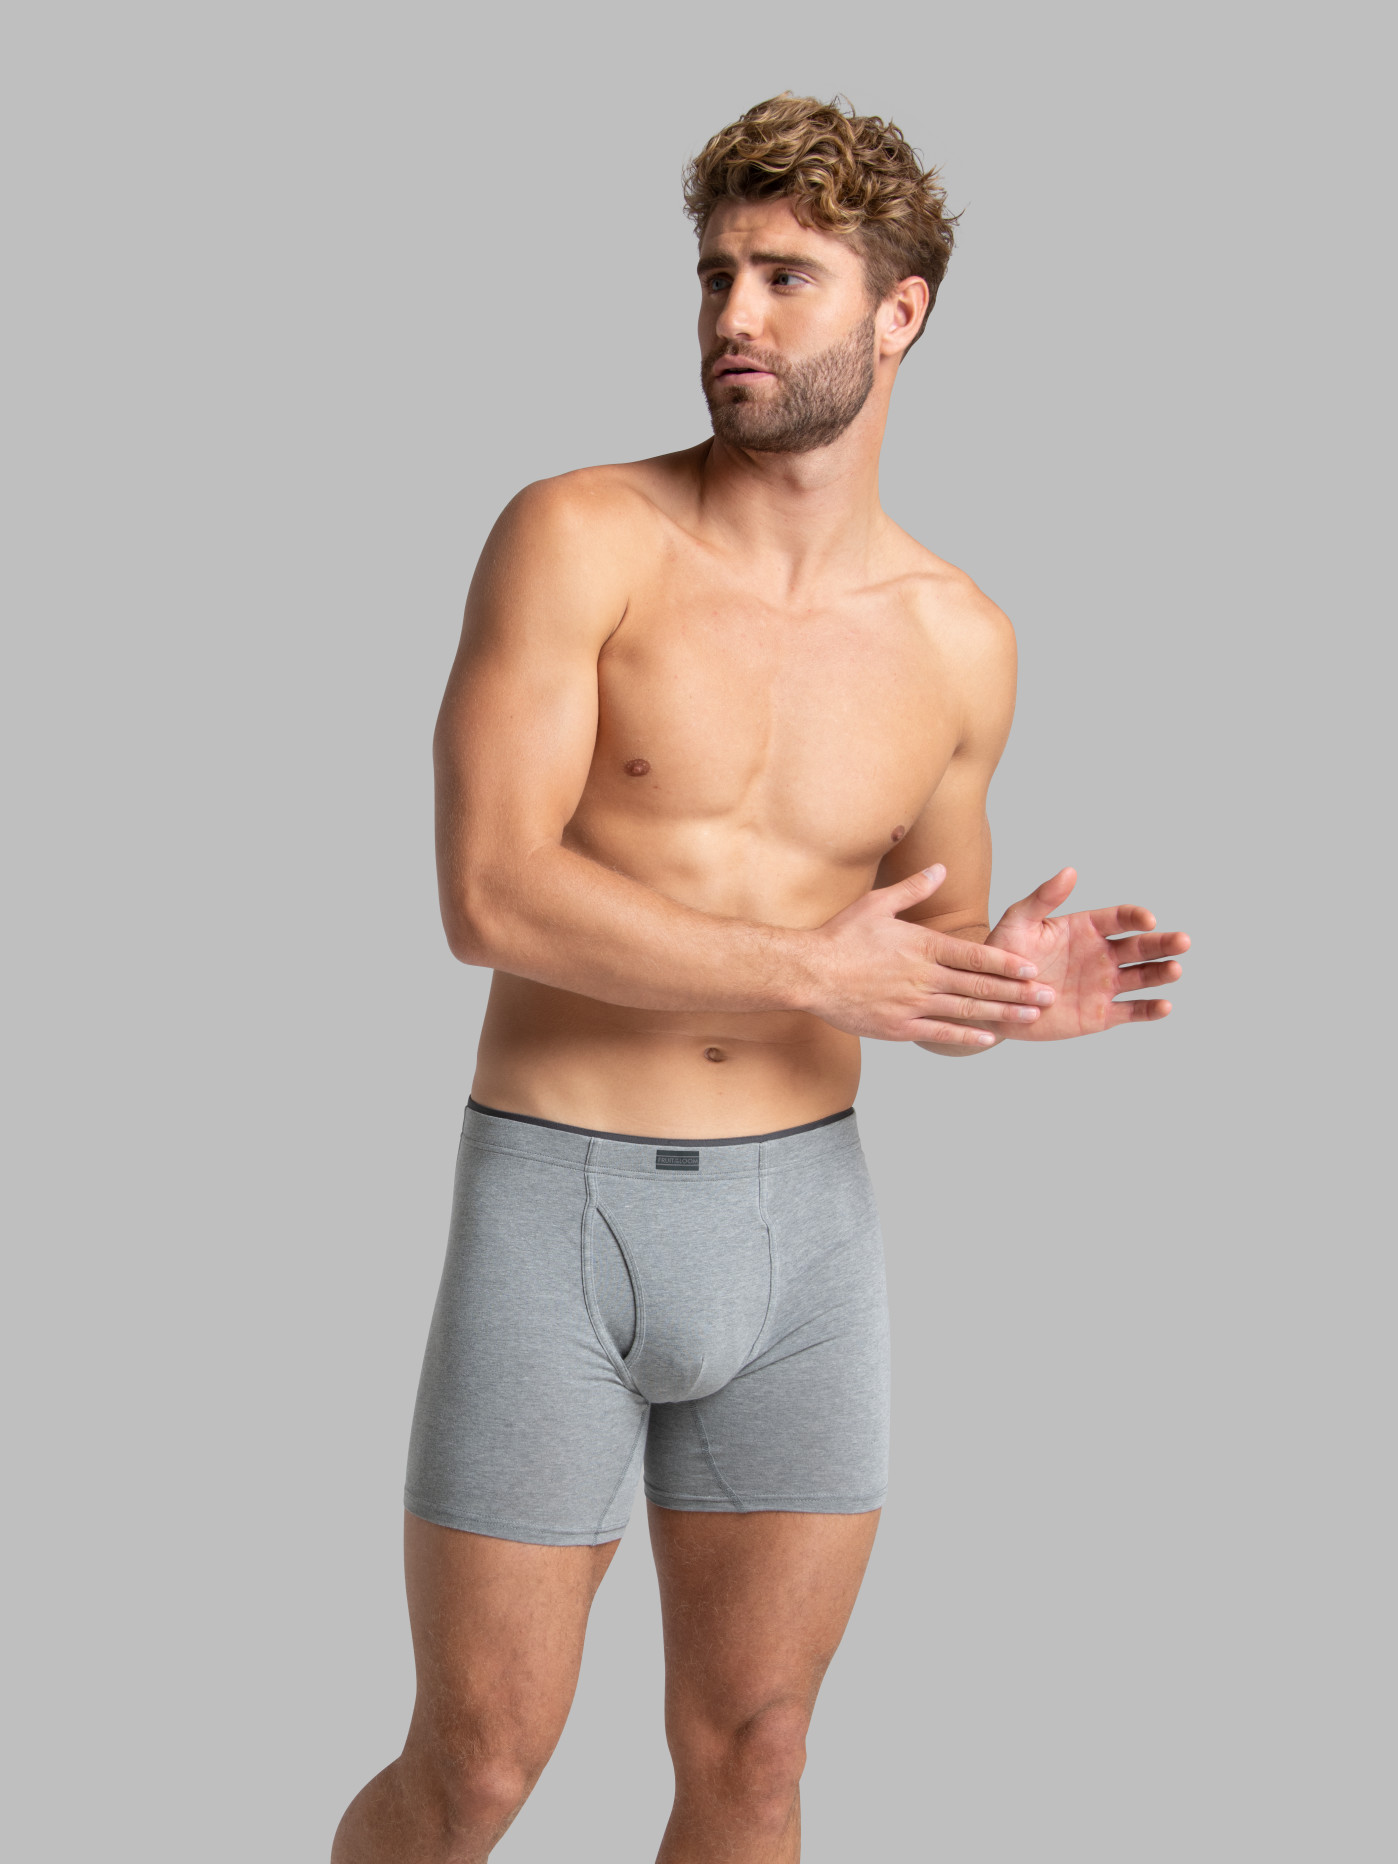 Hanes Encourages Men to Love Their Bodies with 'Every Bod